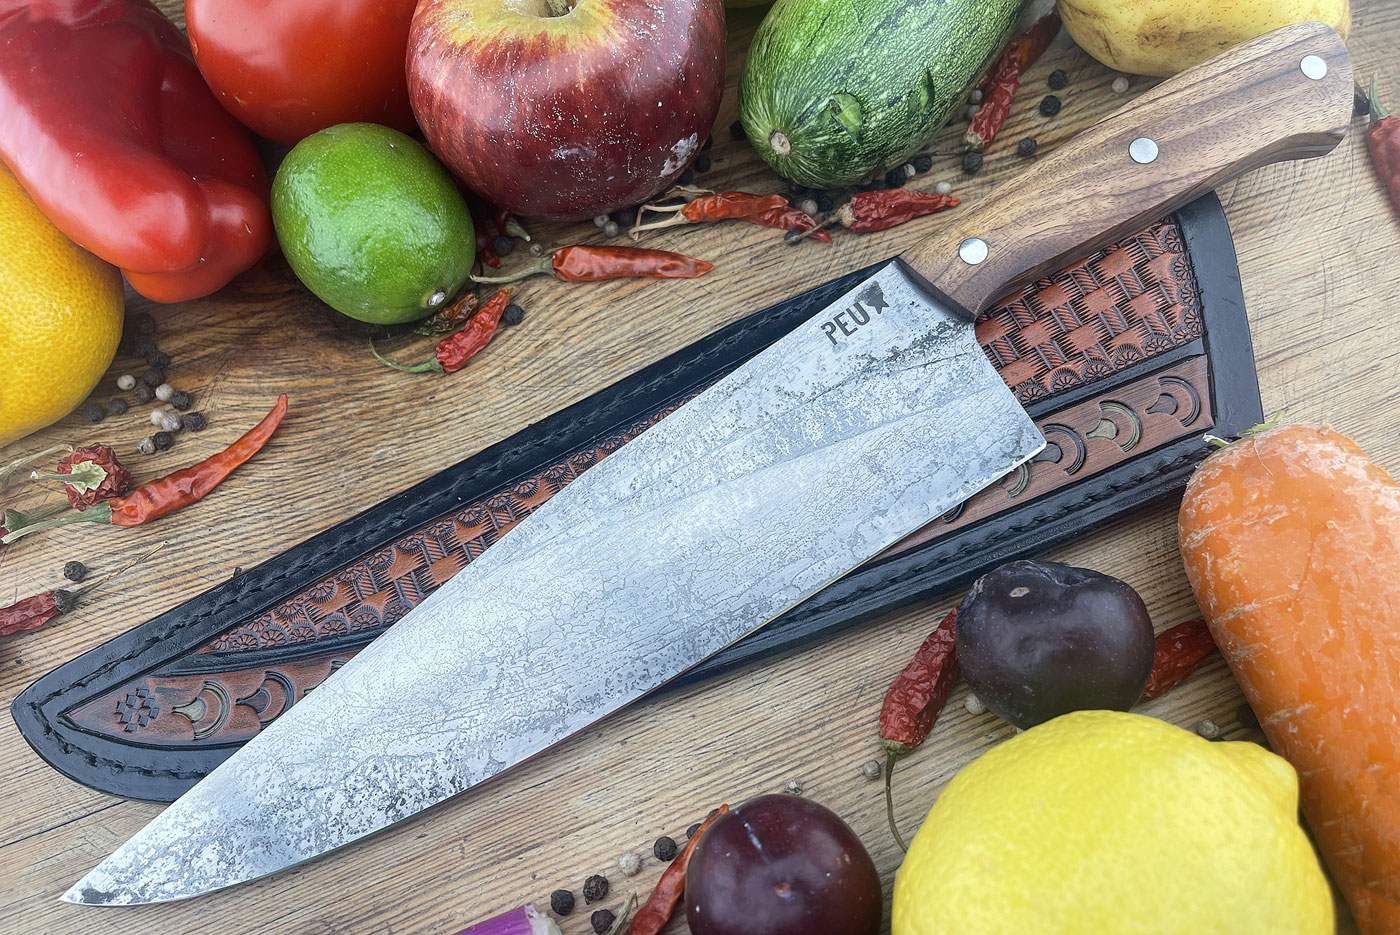 Chef's Knife (Cocinero 230mm) with Urunday and O2 Carbon Steel